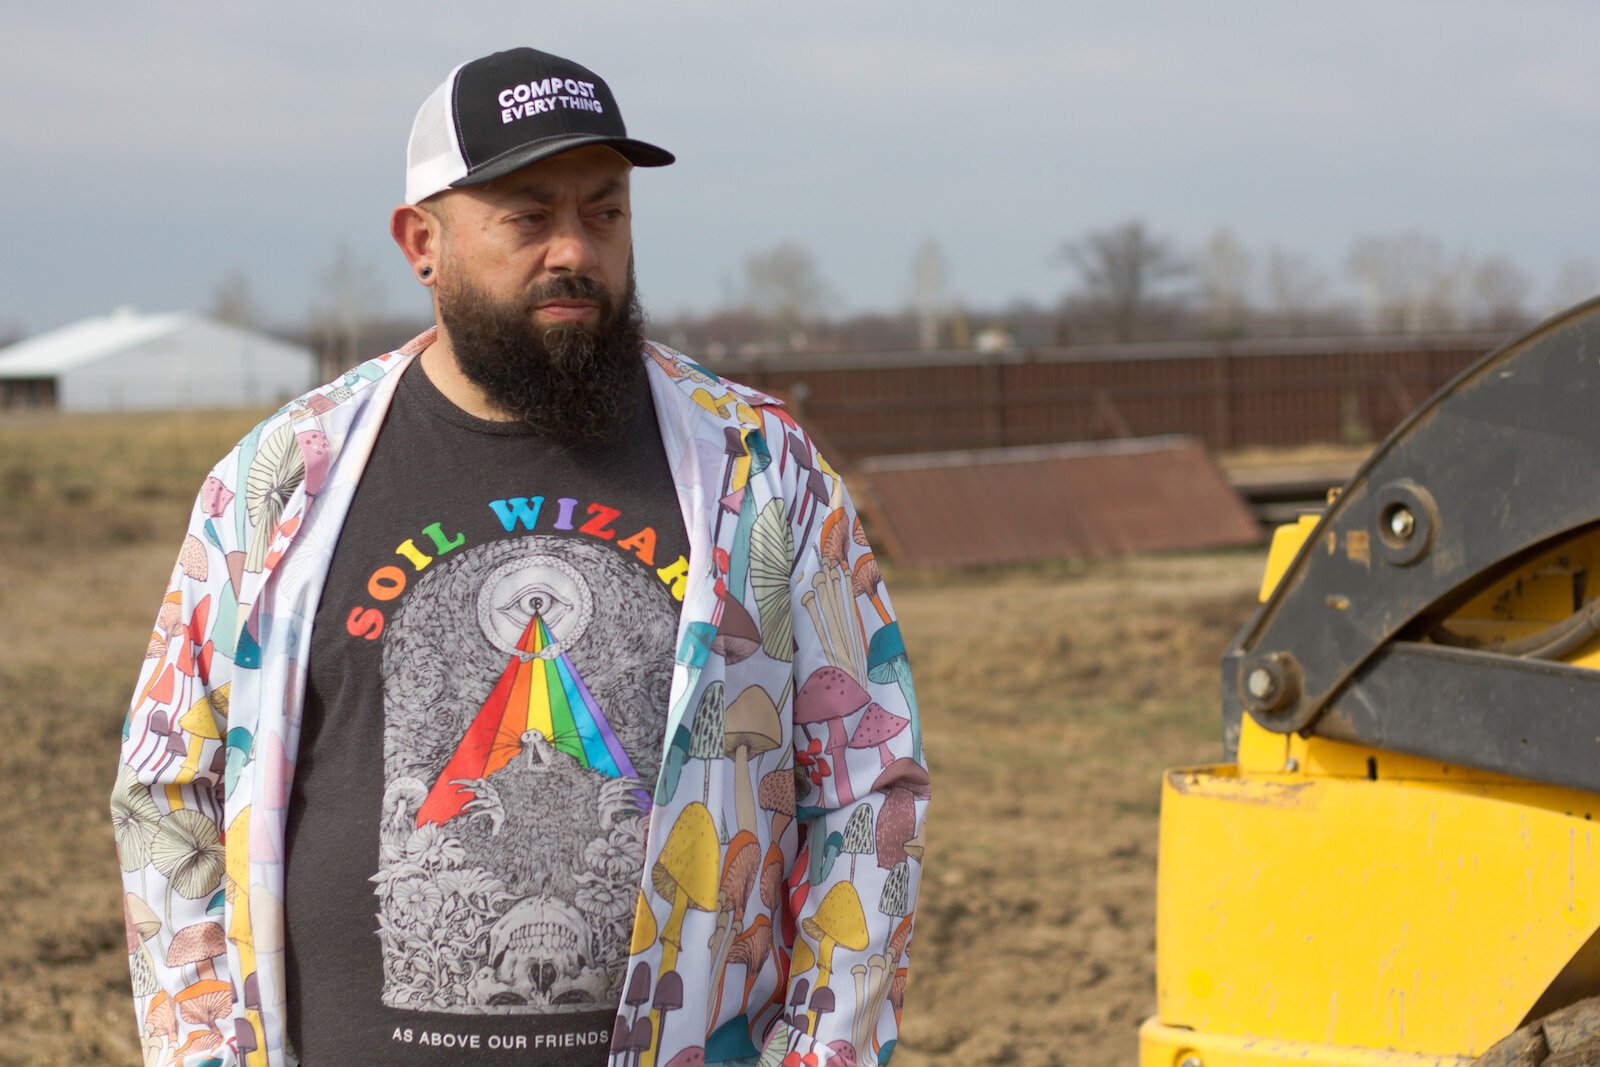 Brett Bloom is a Fort Wayne artist and activist, as well as the creator of Dirt Wain community-scale composting.